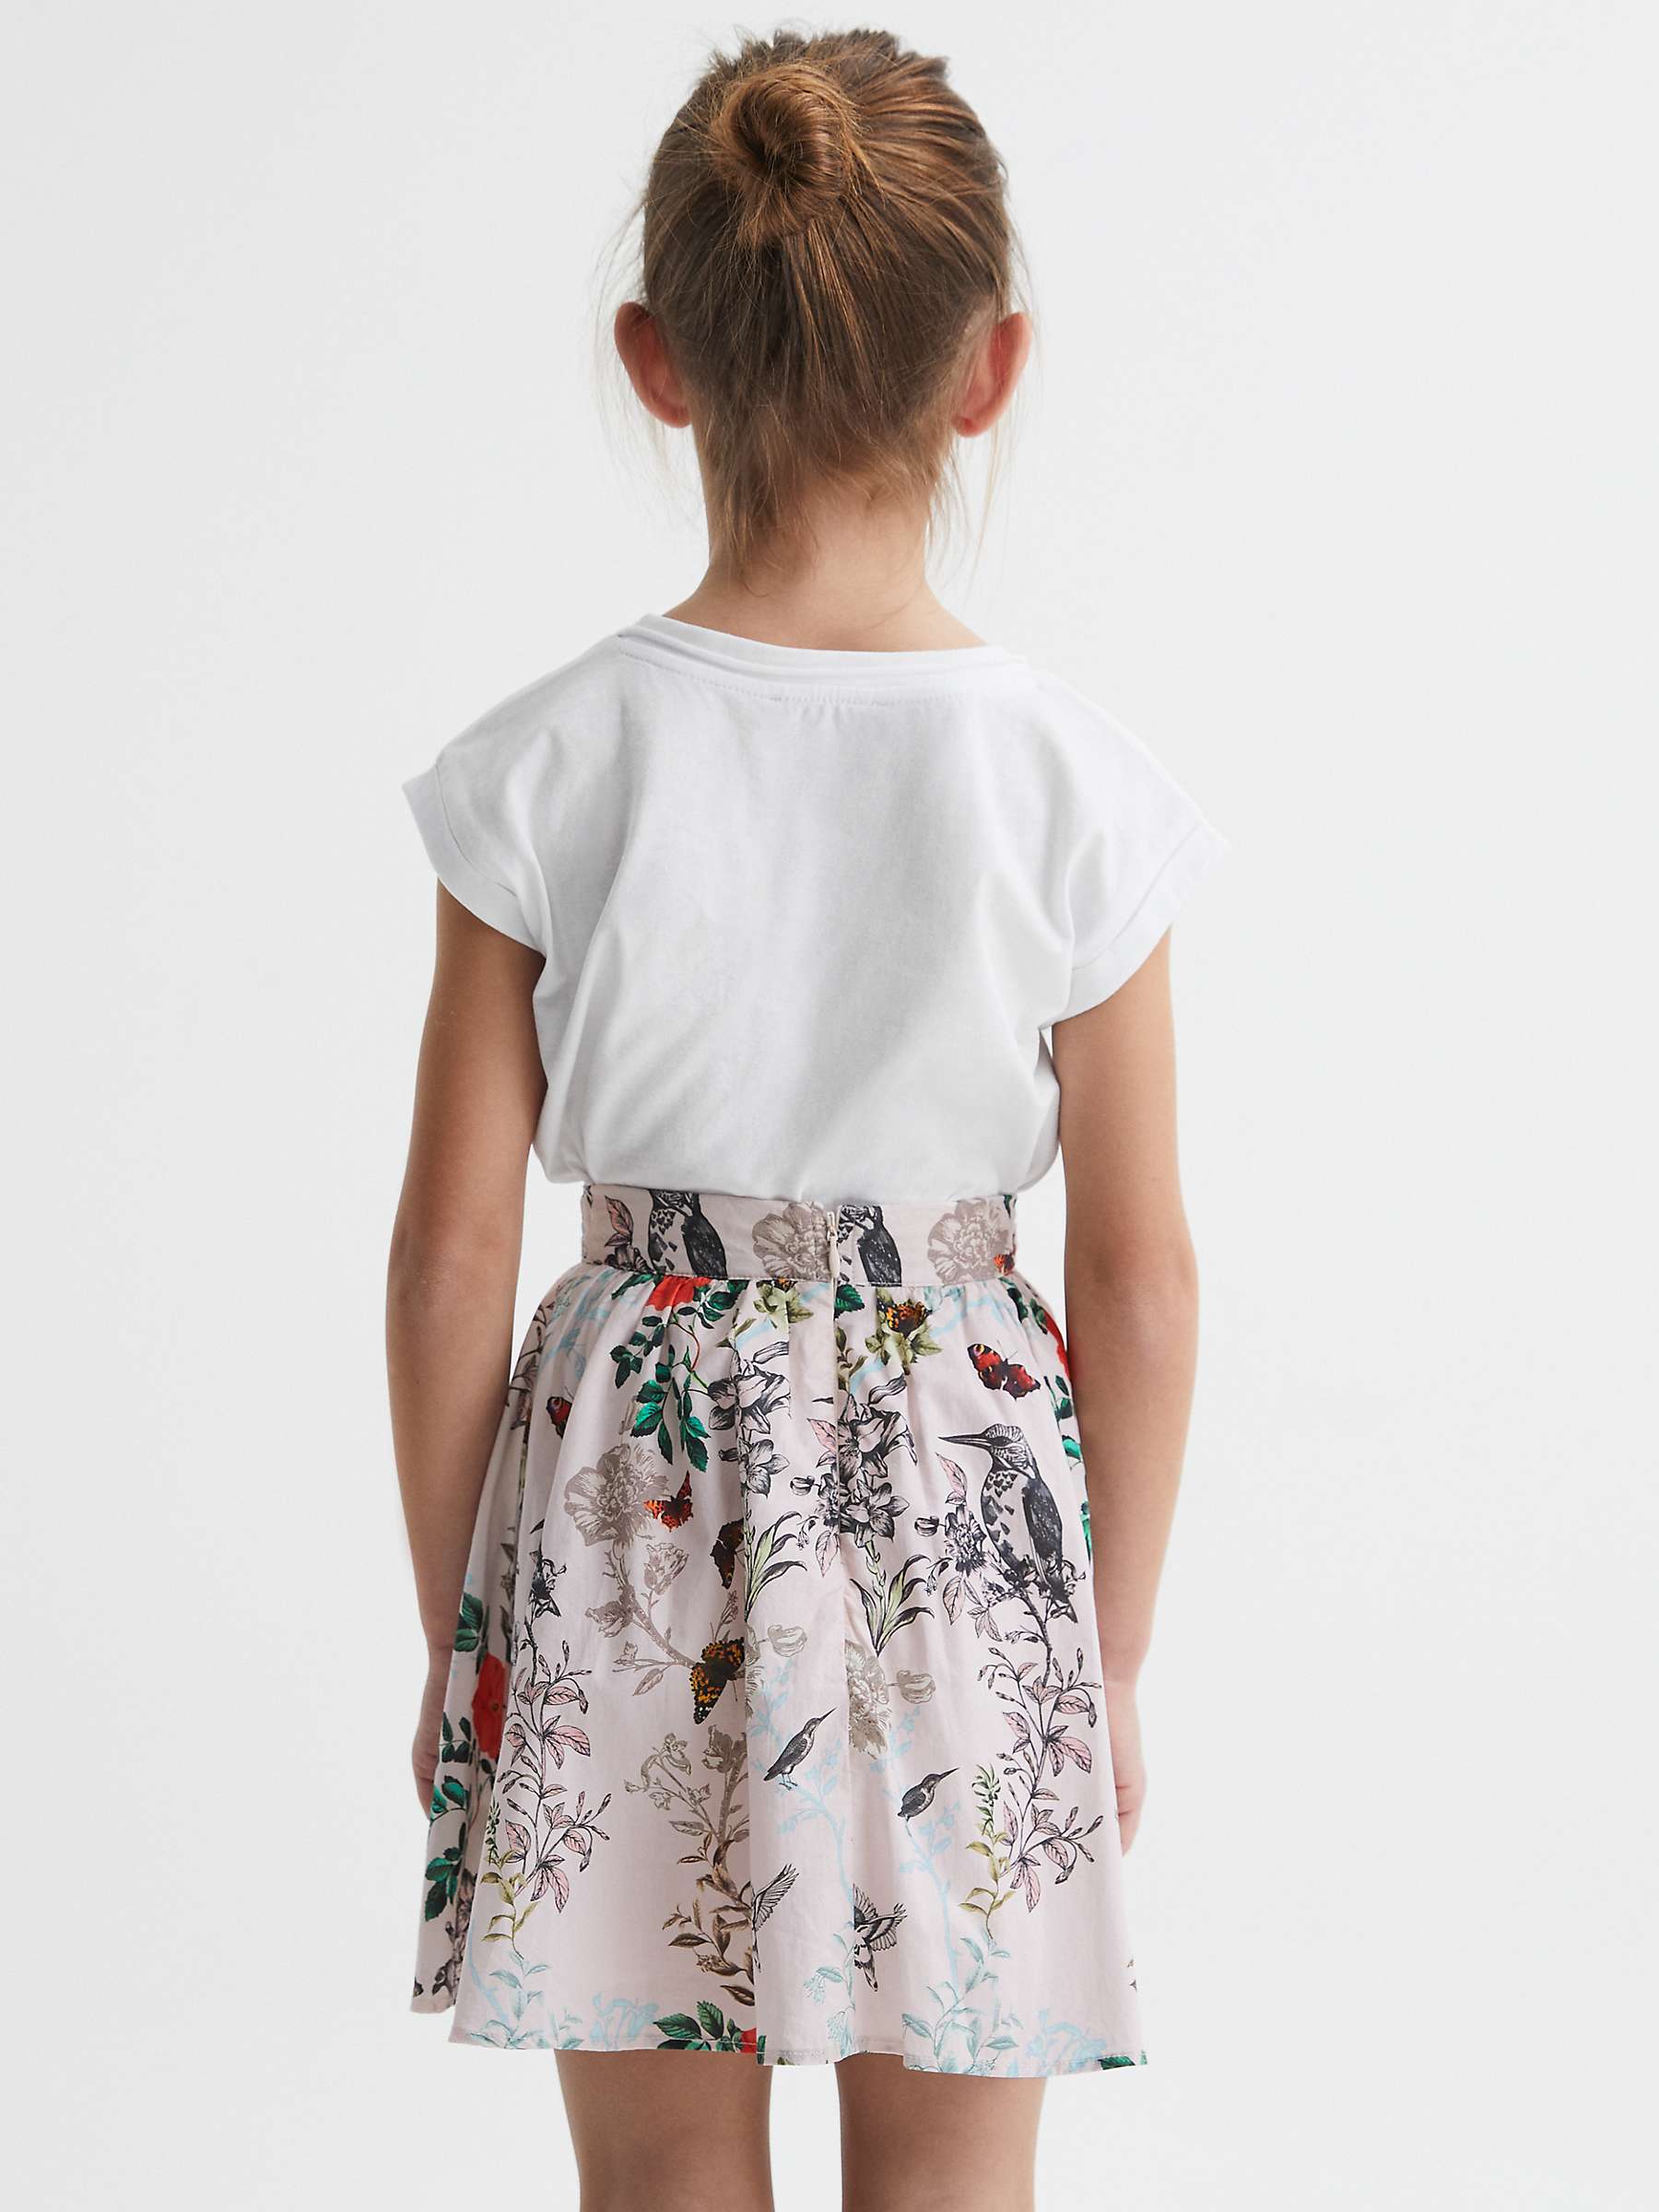 Buy Reiss Kids' Terry Cotton Cropped T-Shirt Online at johnlewis.com